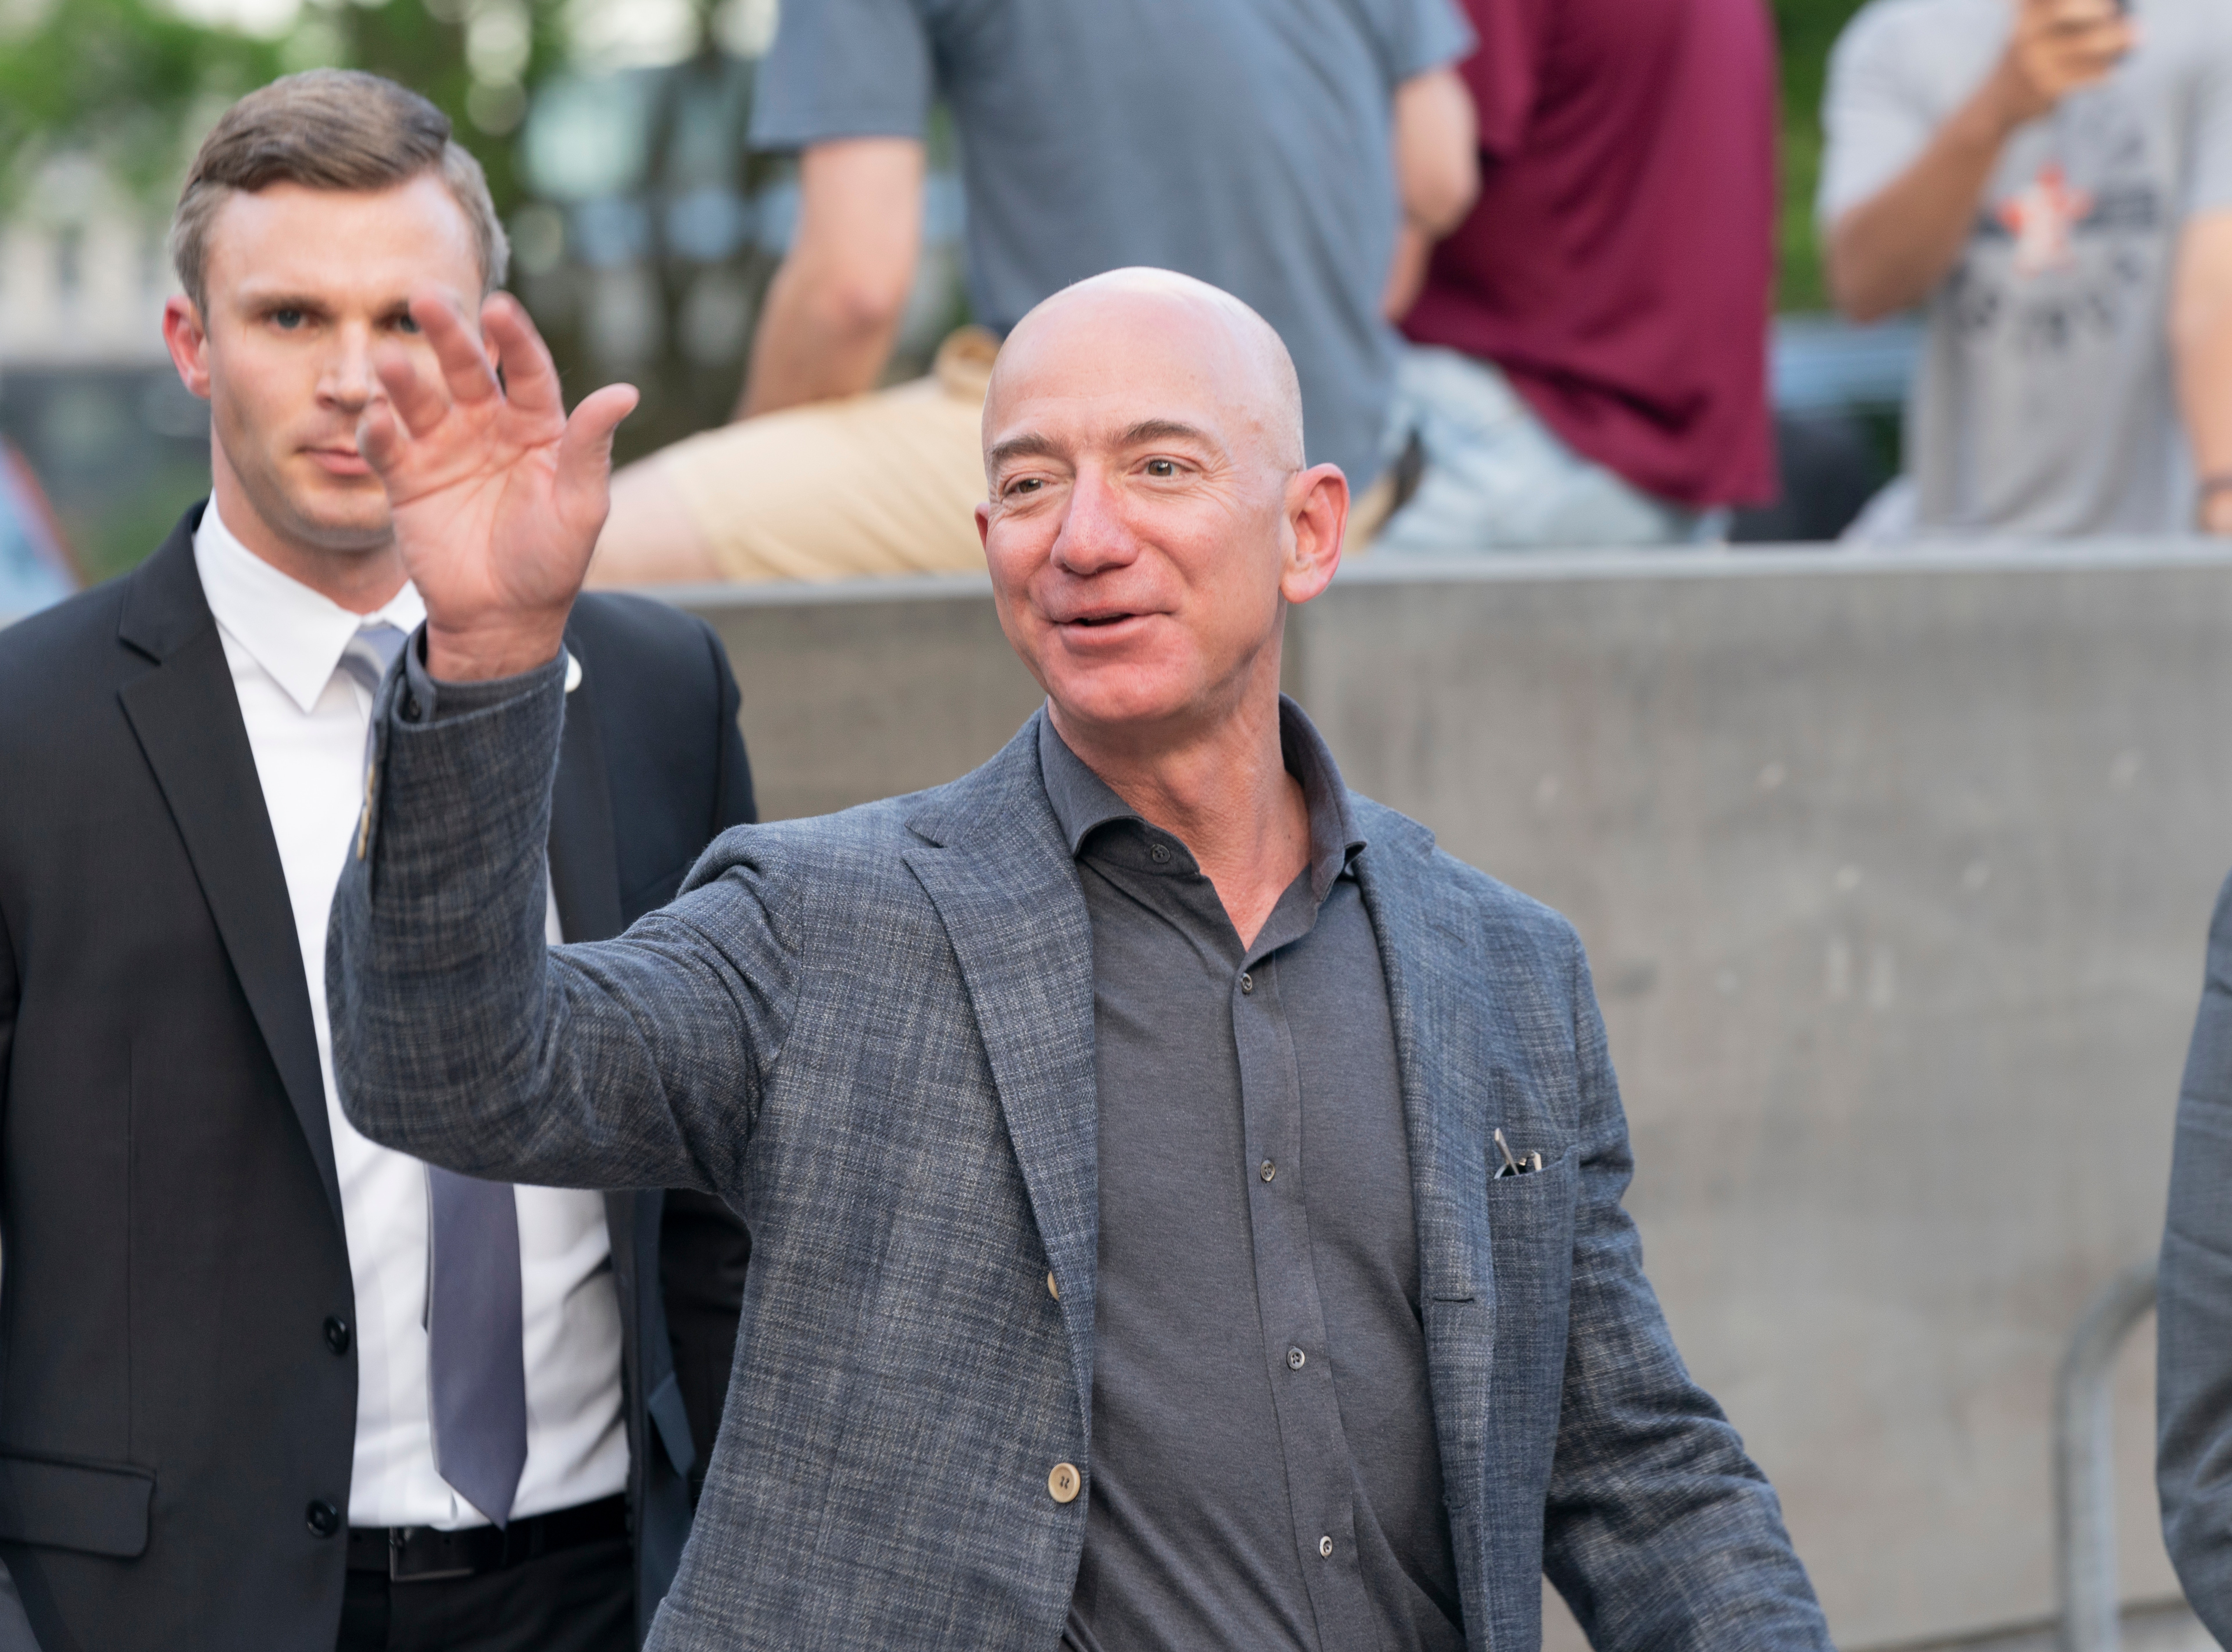 6 Of The Most Inspirational Jeff Bezos Quotes: &#39;If You Never Want To Be Criticized, For Goodness&#39; Sake Don&#39;t Do Anything New&#39;